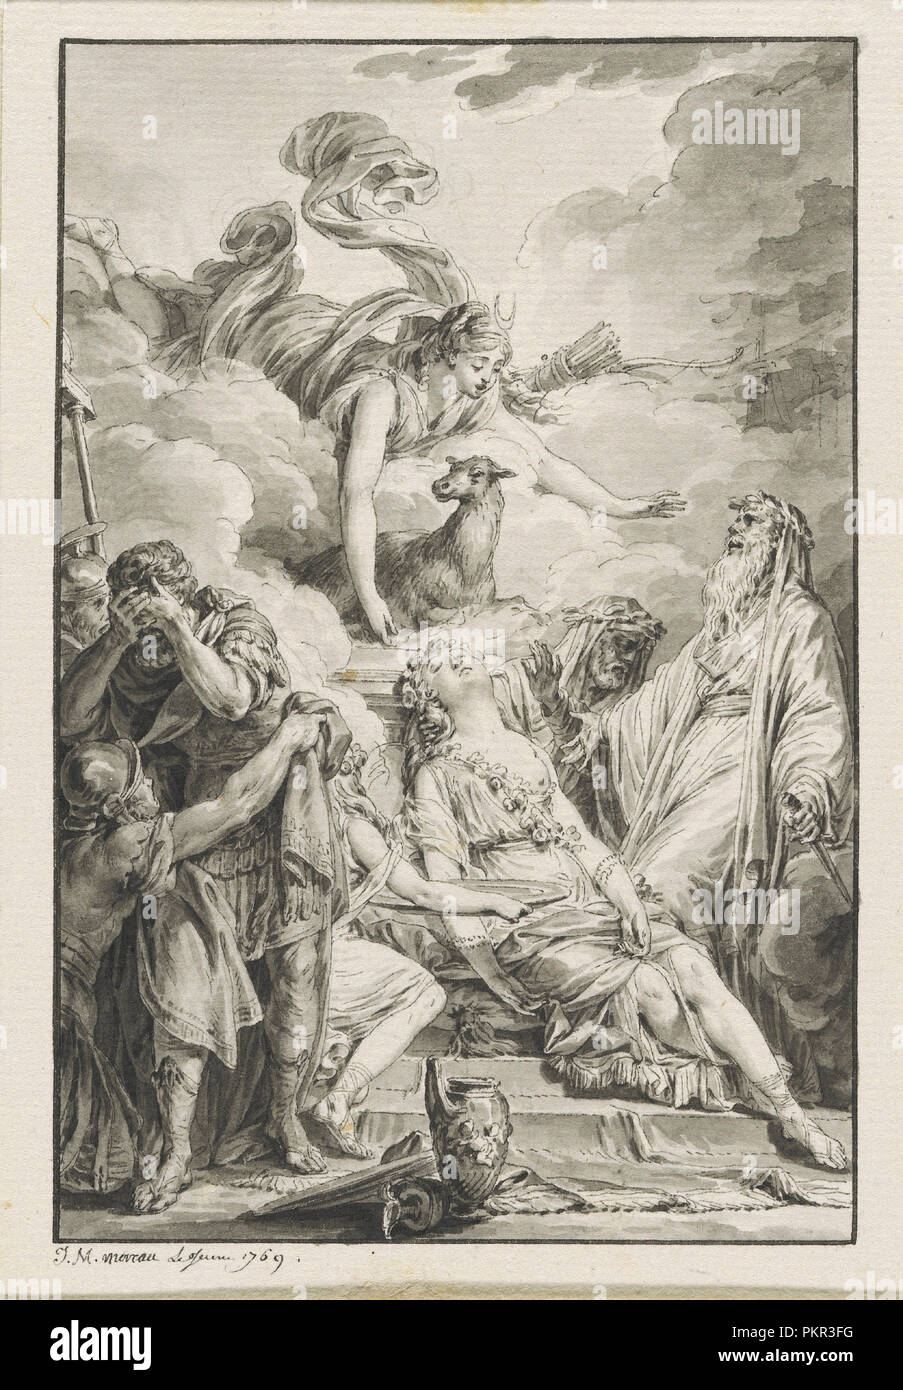 The Sacrifice of Iphigenia. Dated: 1769. Dimensions: image: 13.3 x 8.9 cm (5 1/4 x 3 1/2 in.). Medium: pen and black ink with gray wash over traces of graphite with border line by the artist on laid paper. Museum: National Gallery of Art, Washington DC. Author: MOREAU, JEAN MICHEL D. J. Stock Photo